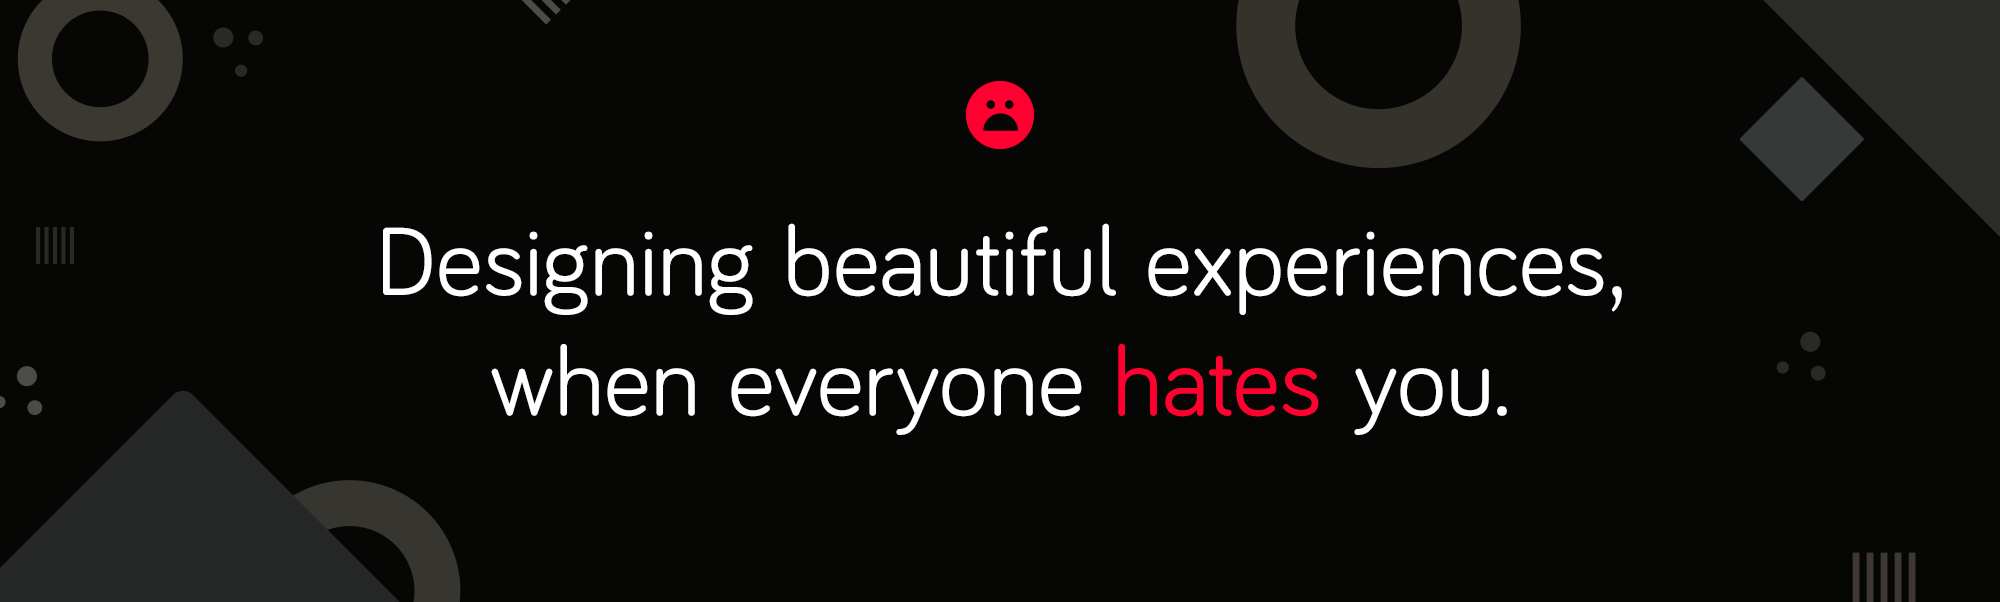 Designing beautiful experiences, when everyone hates you.